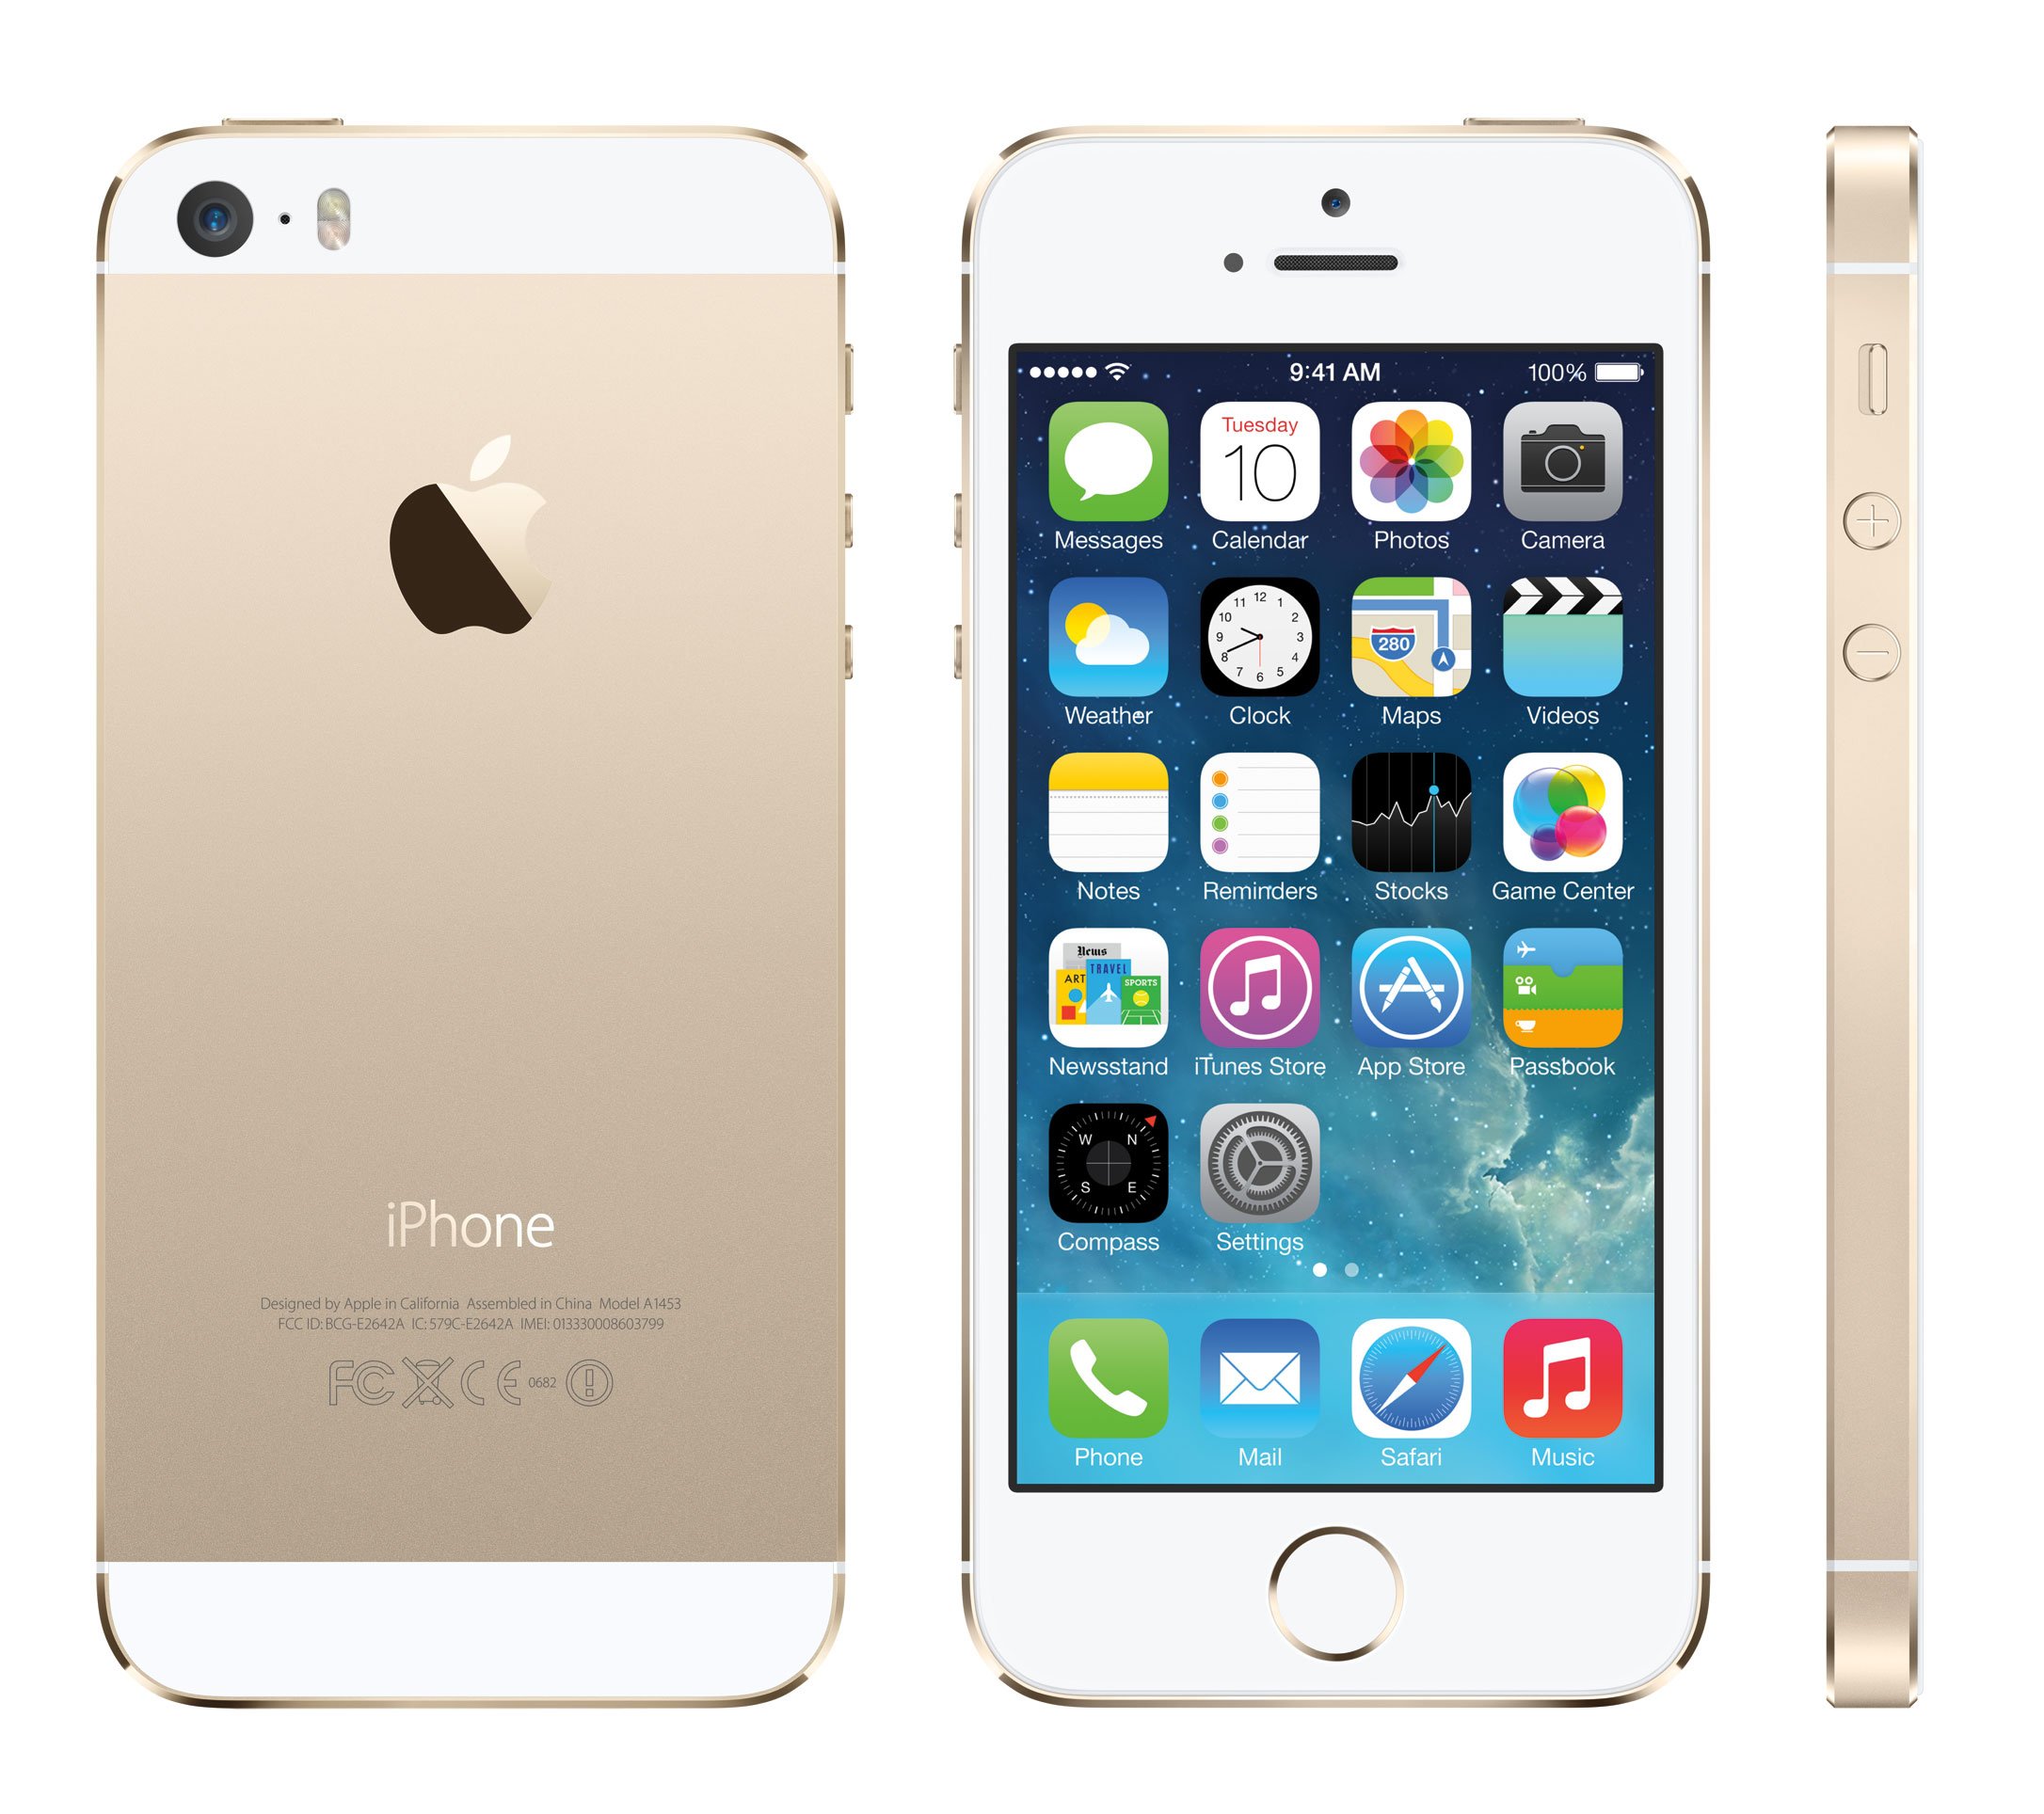 iPhone 5s release date quantities are expected to be very low.